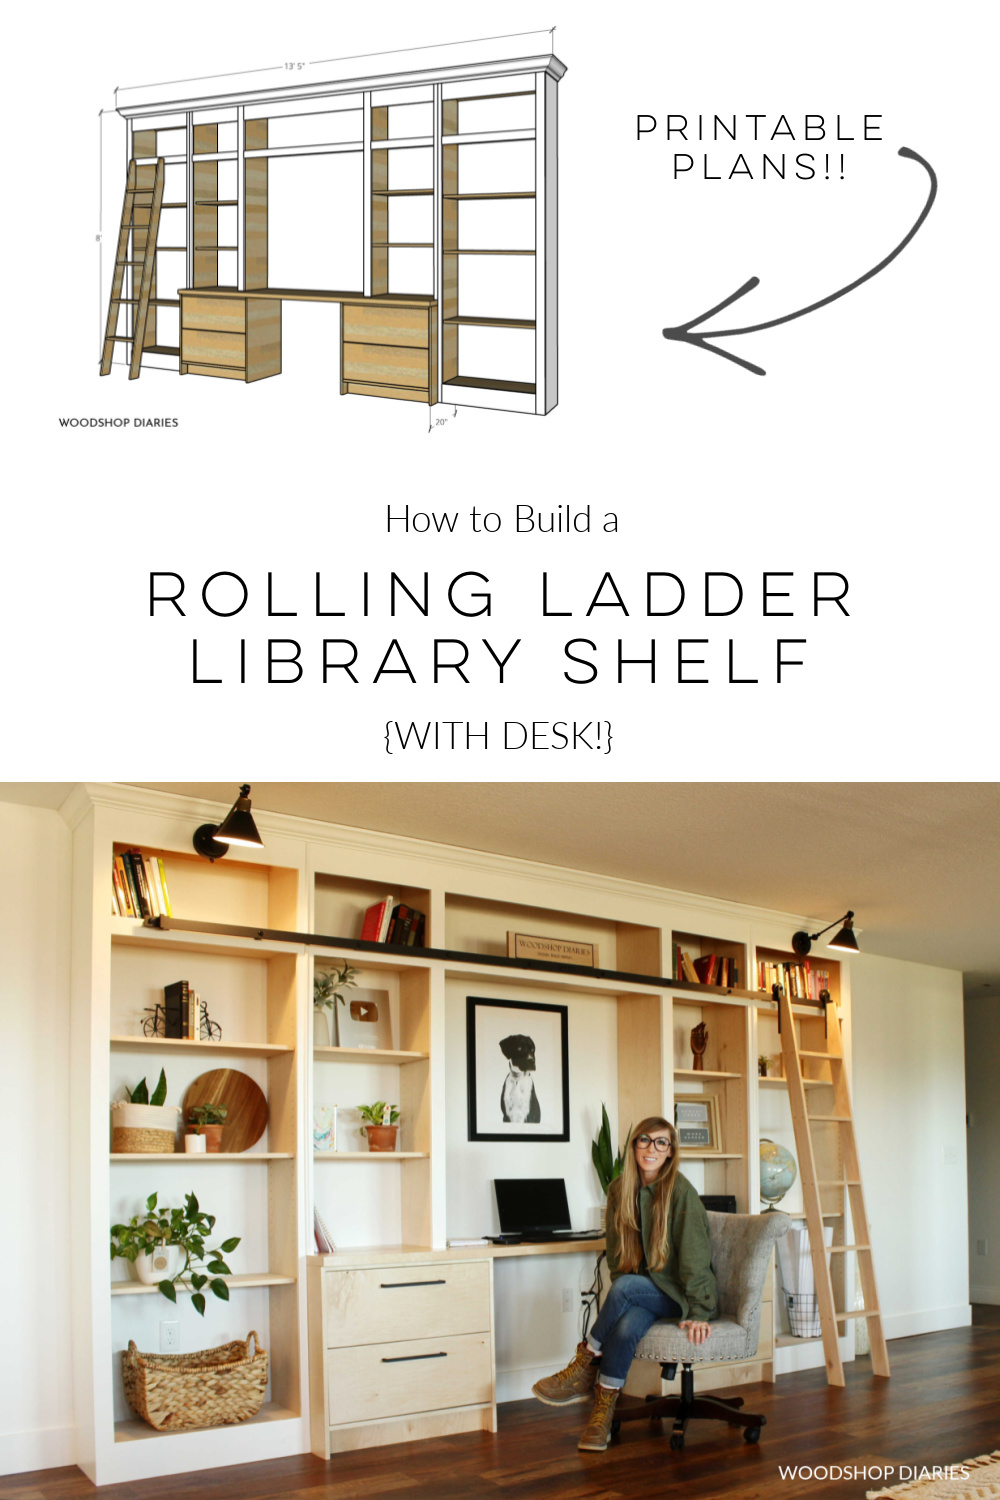 Pinterest image collage showing overall dimensional diagram at top with text "printable plans" and Shara sitting at desk of library bookshelf at bottom with text "How to build a rolling ladder library shelf with desk"